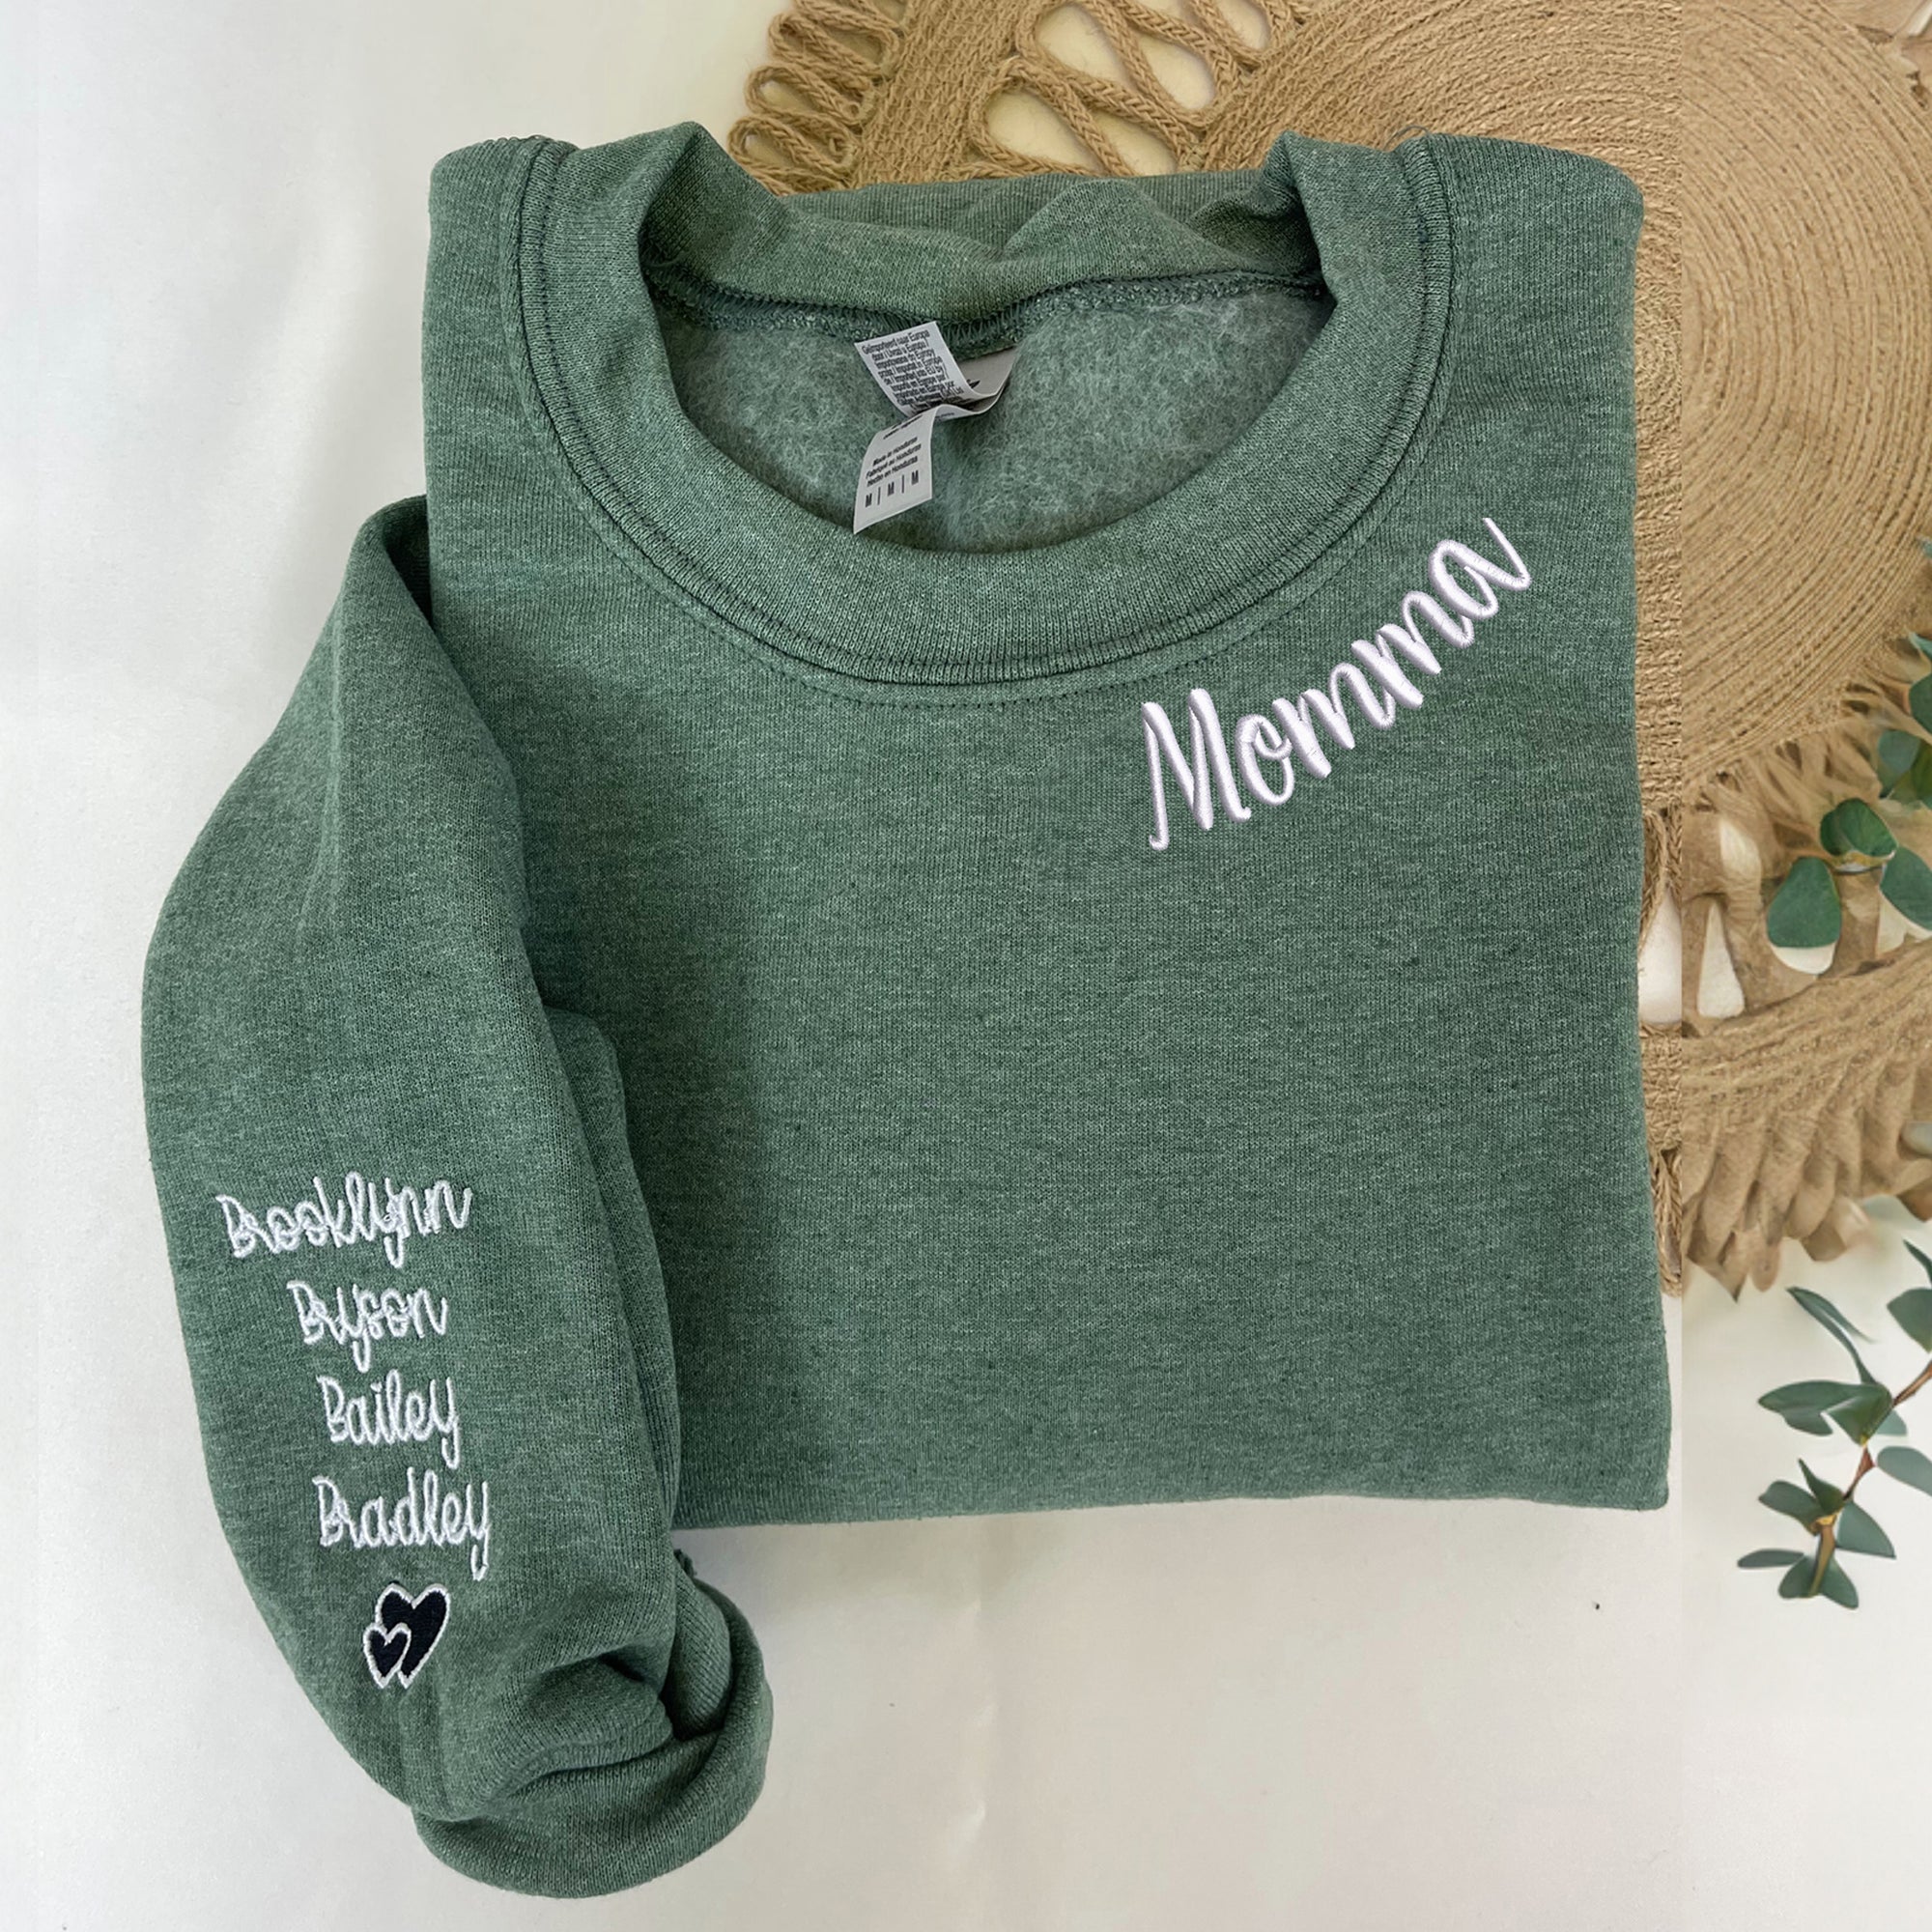 Custom Embroidered Momma Sweatshirt with Kid Names on Sleeve, Personalized Gift for Momma Sweatshirt or New Momma Hoodie